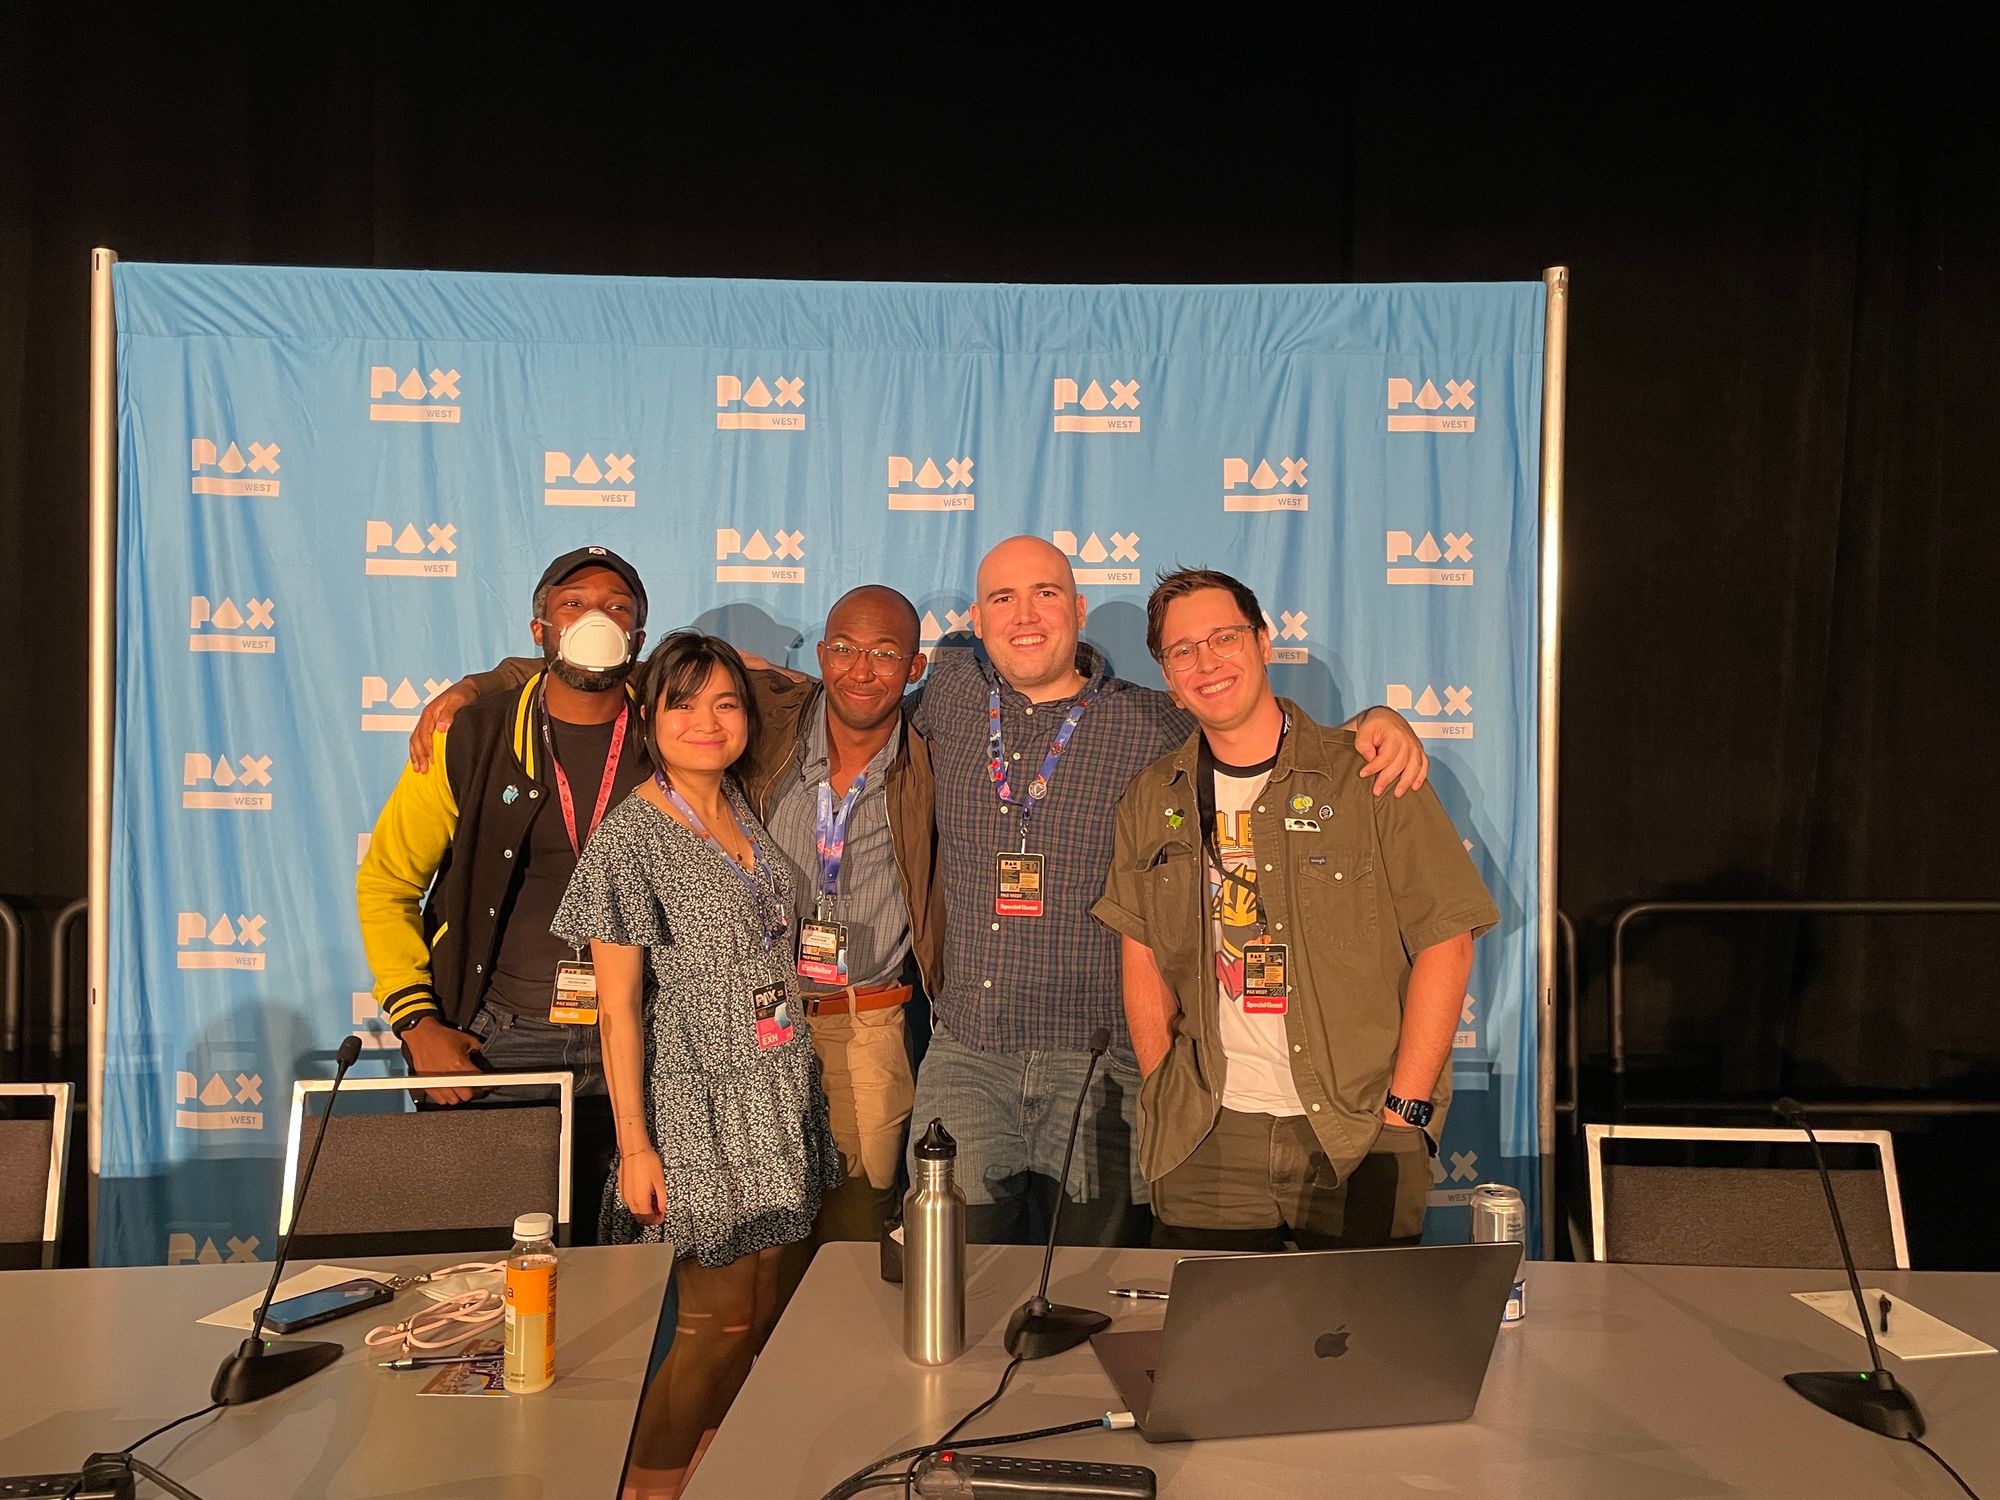 5 people standing in front of a PAX photo backdrop.